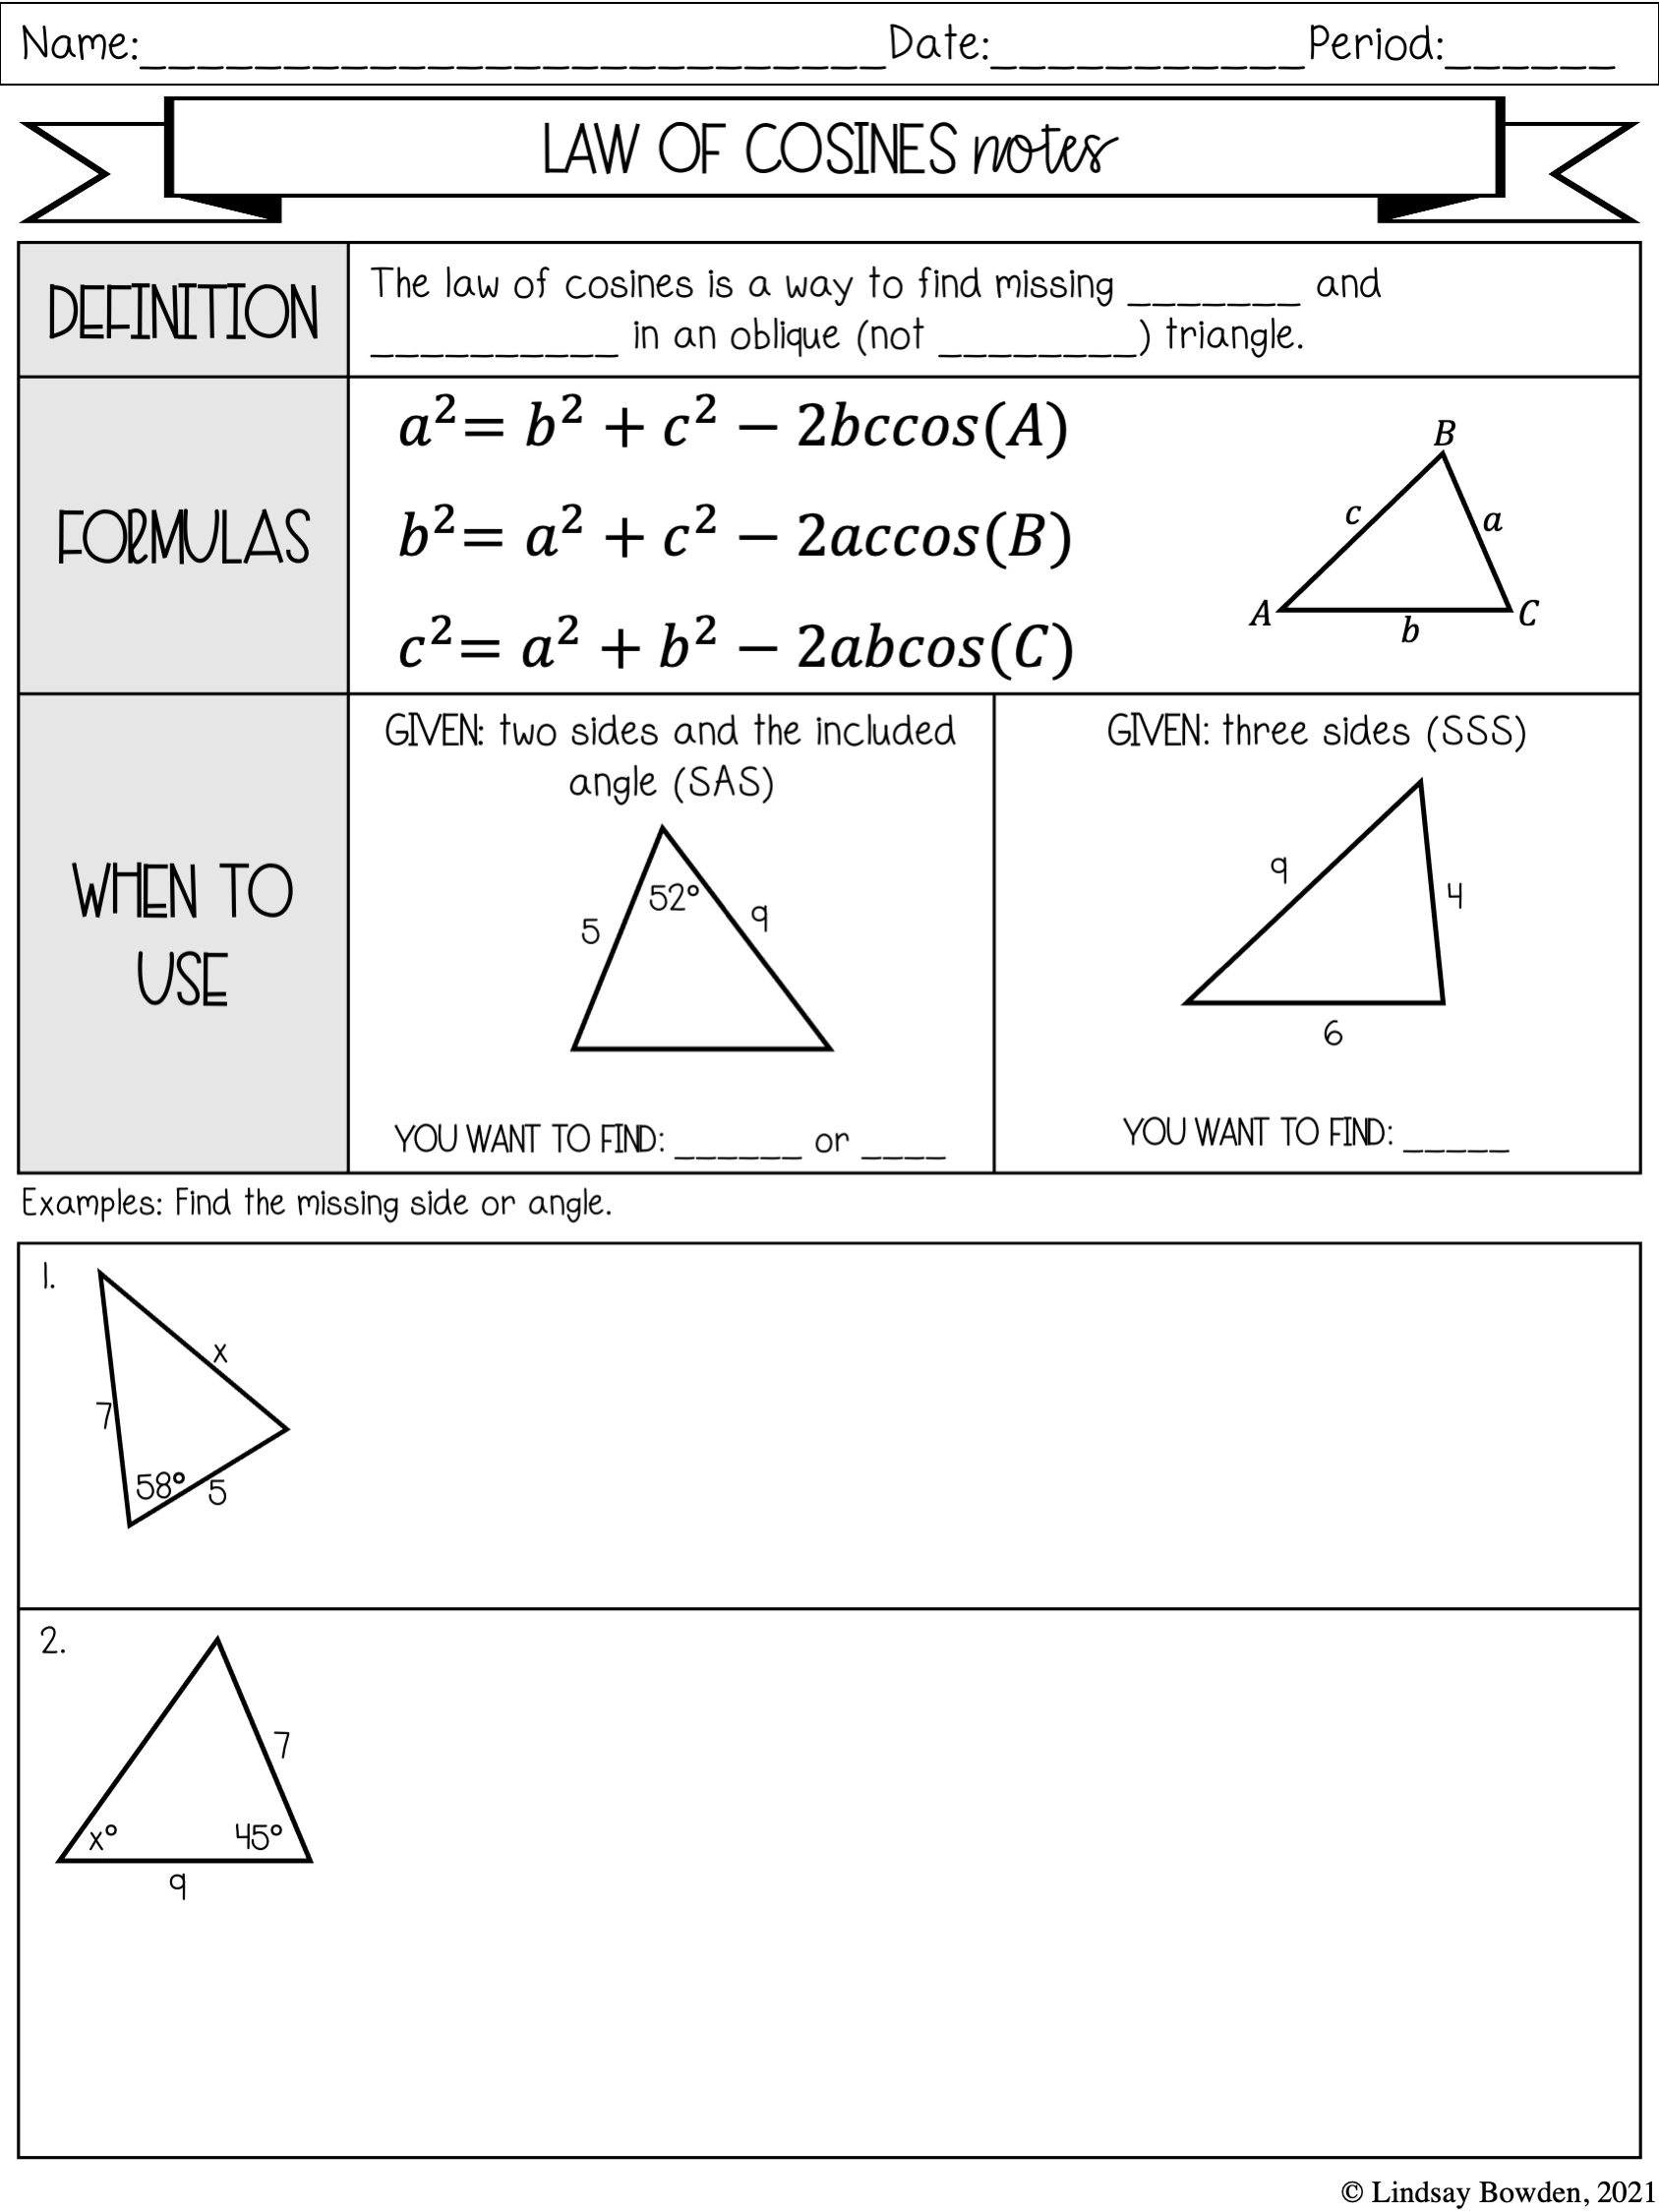 Law of Sines and Cosines Notes and Worksheets - Lindsay Bowden For Law Of Sines Worksheet Answers